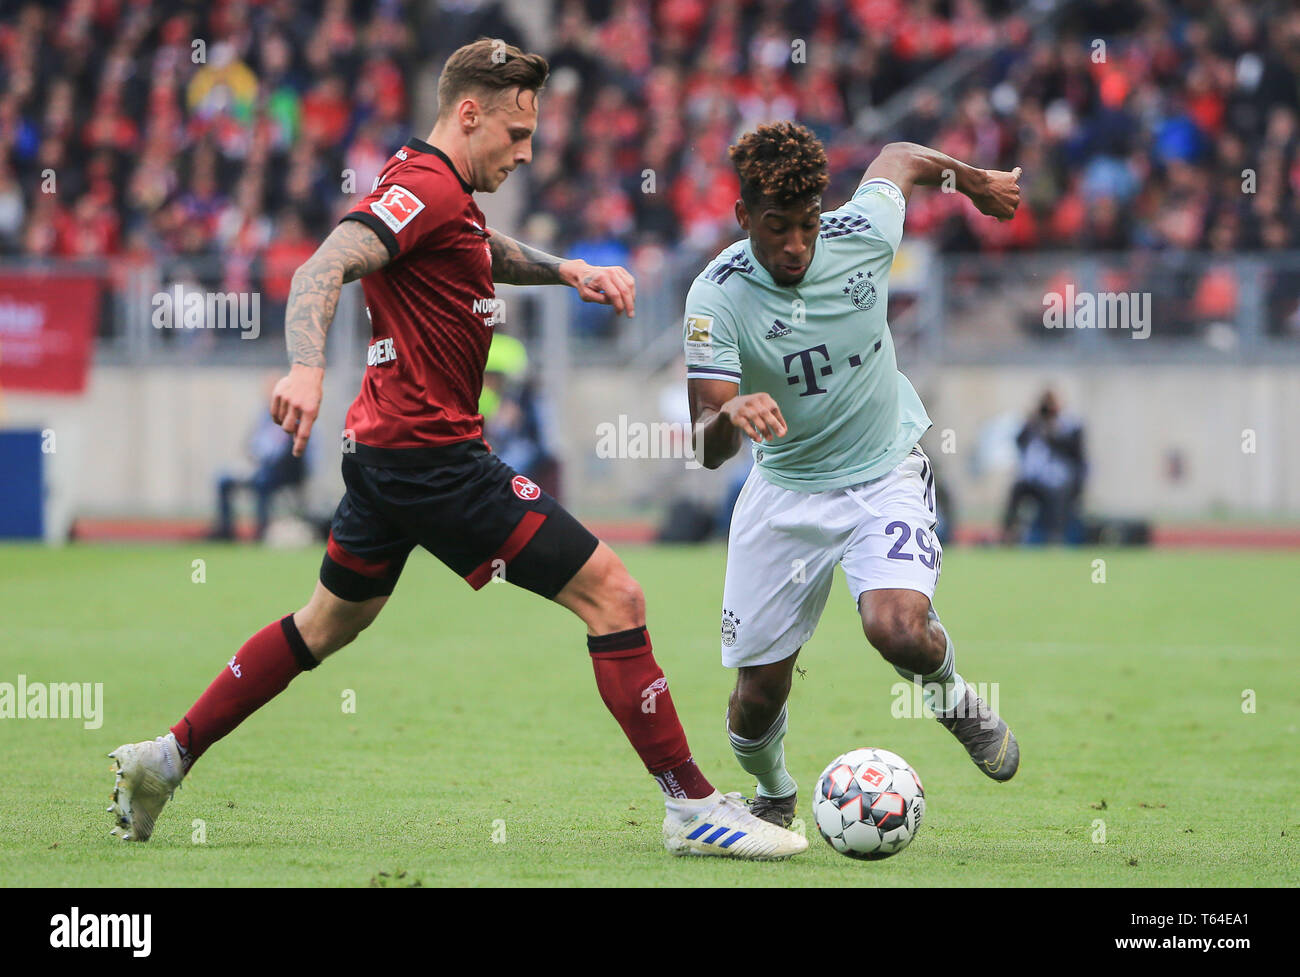 Nuremberg, Germany. 28th Apr, 2019. Bayern Munich's Kingsley Coman (R) vies with Nuremberg's Robert Bauer during a German Bundesliga match between 1.FC Nuremberg and FC Bayern Munich in Nuremberg, Germany, on April 28, 2019. The match ended 1-1. Credit: Philippe Ruiz/Xinhua/Alamy Live News Stock Photo